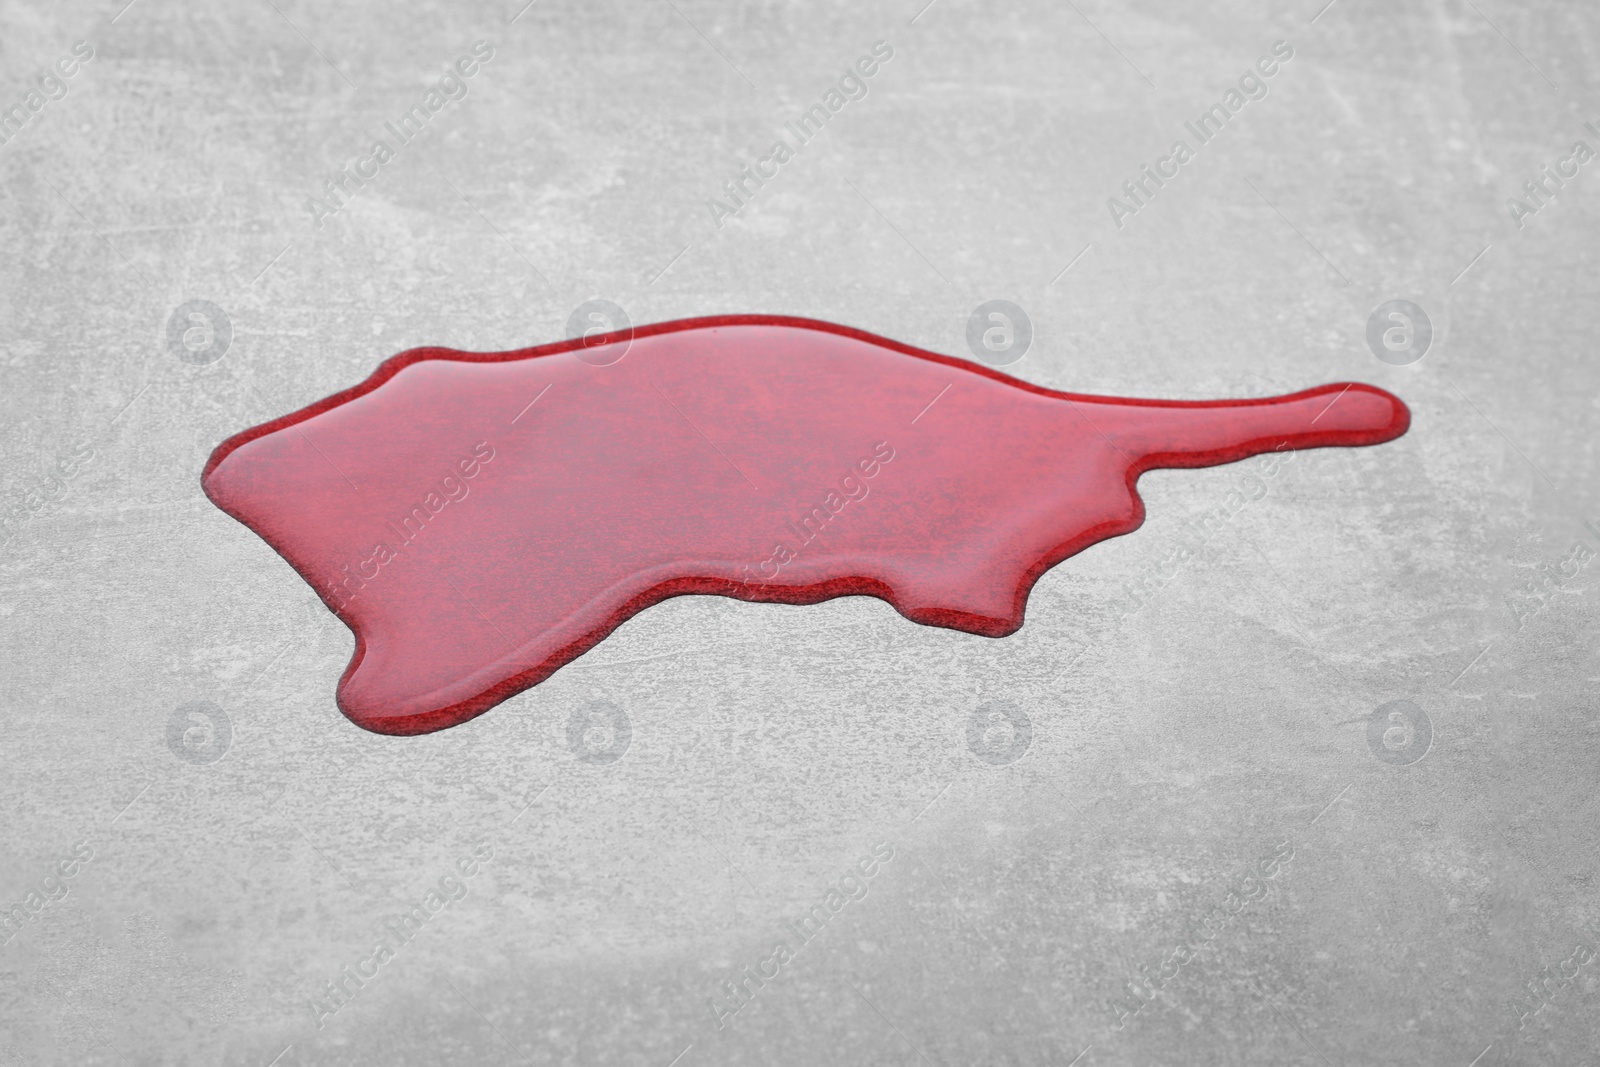 Photo of Puddle of red liquid on light grey surface